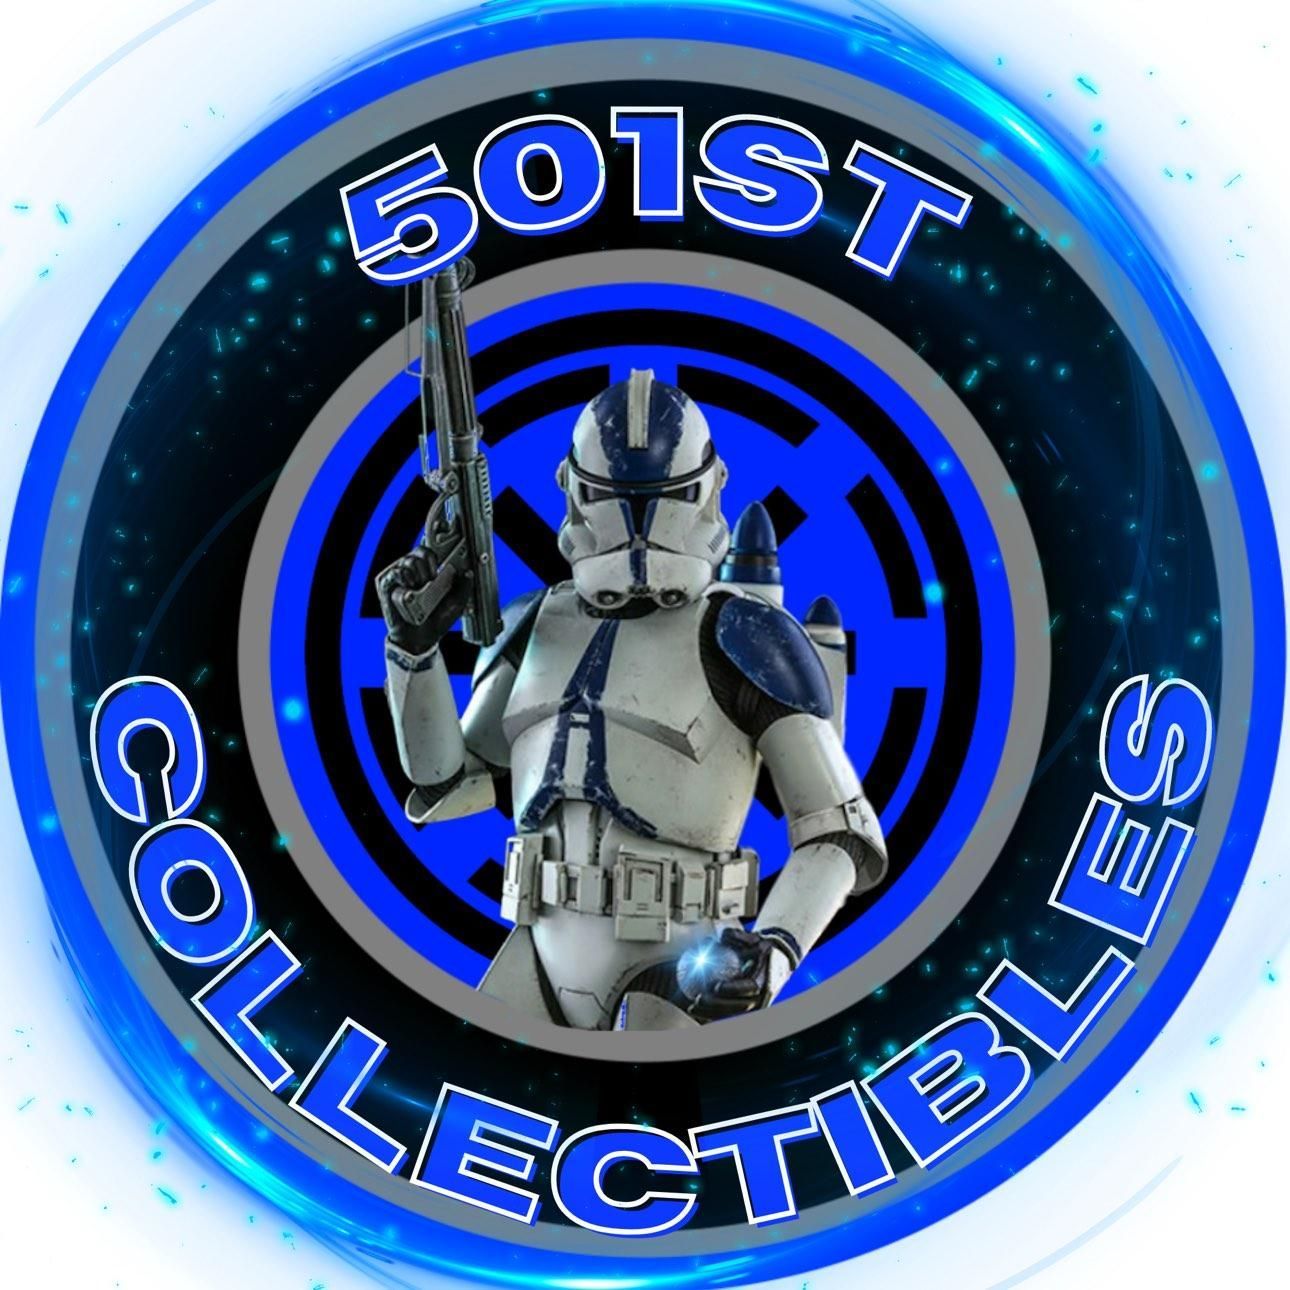 501stcollectibles